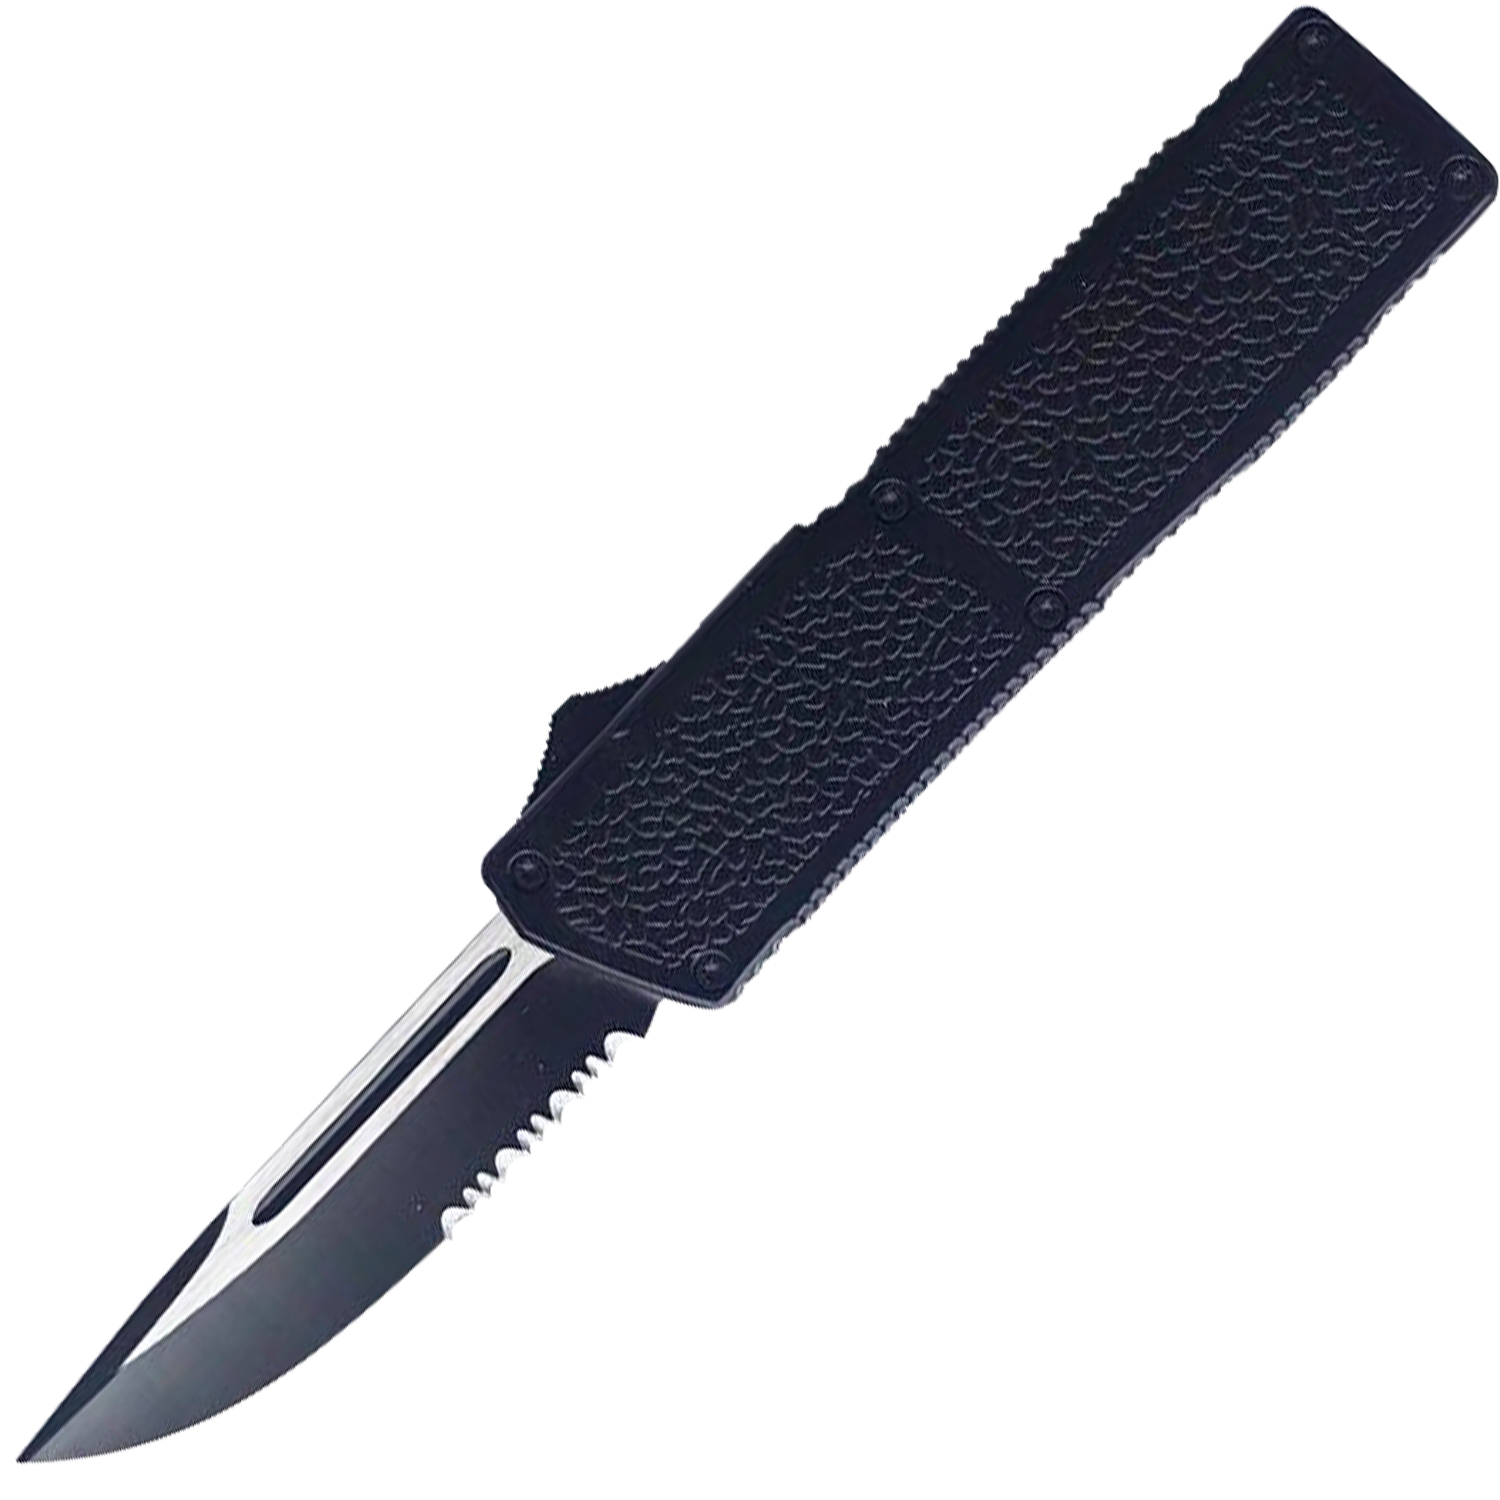 Lighting Action Assisted Knife Drop Point Black Serrated